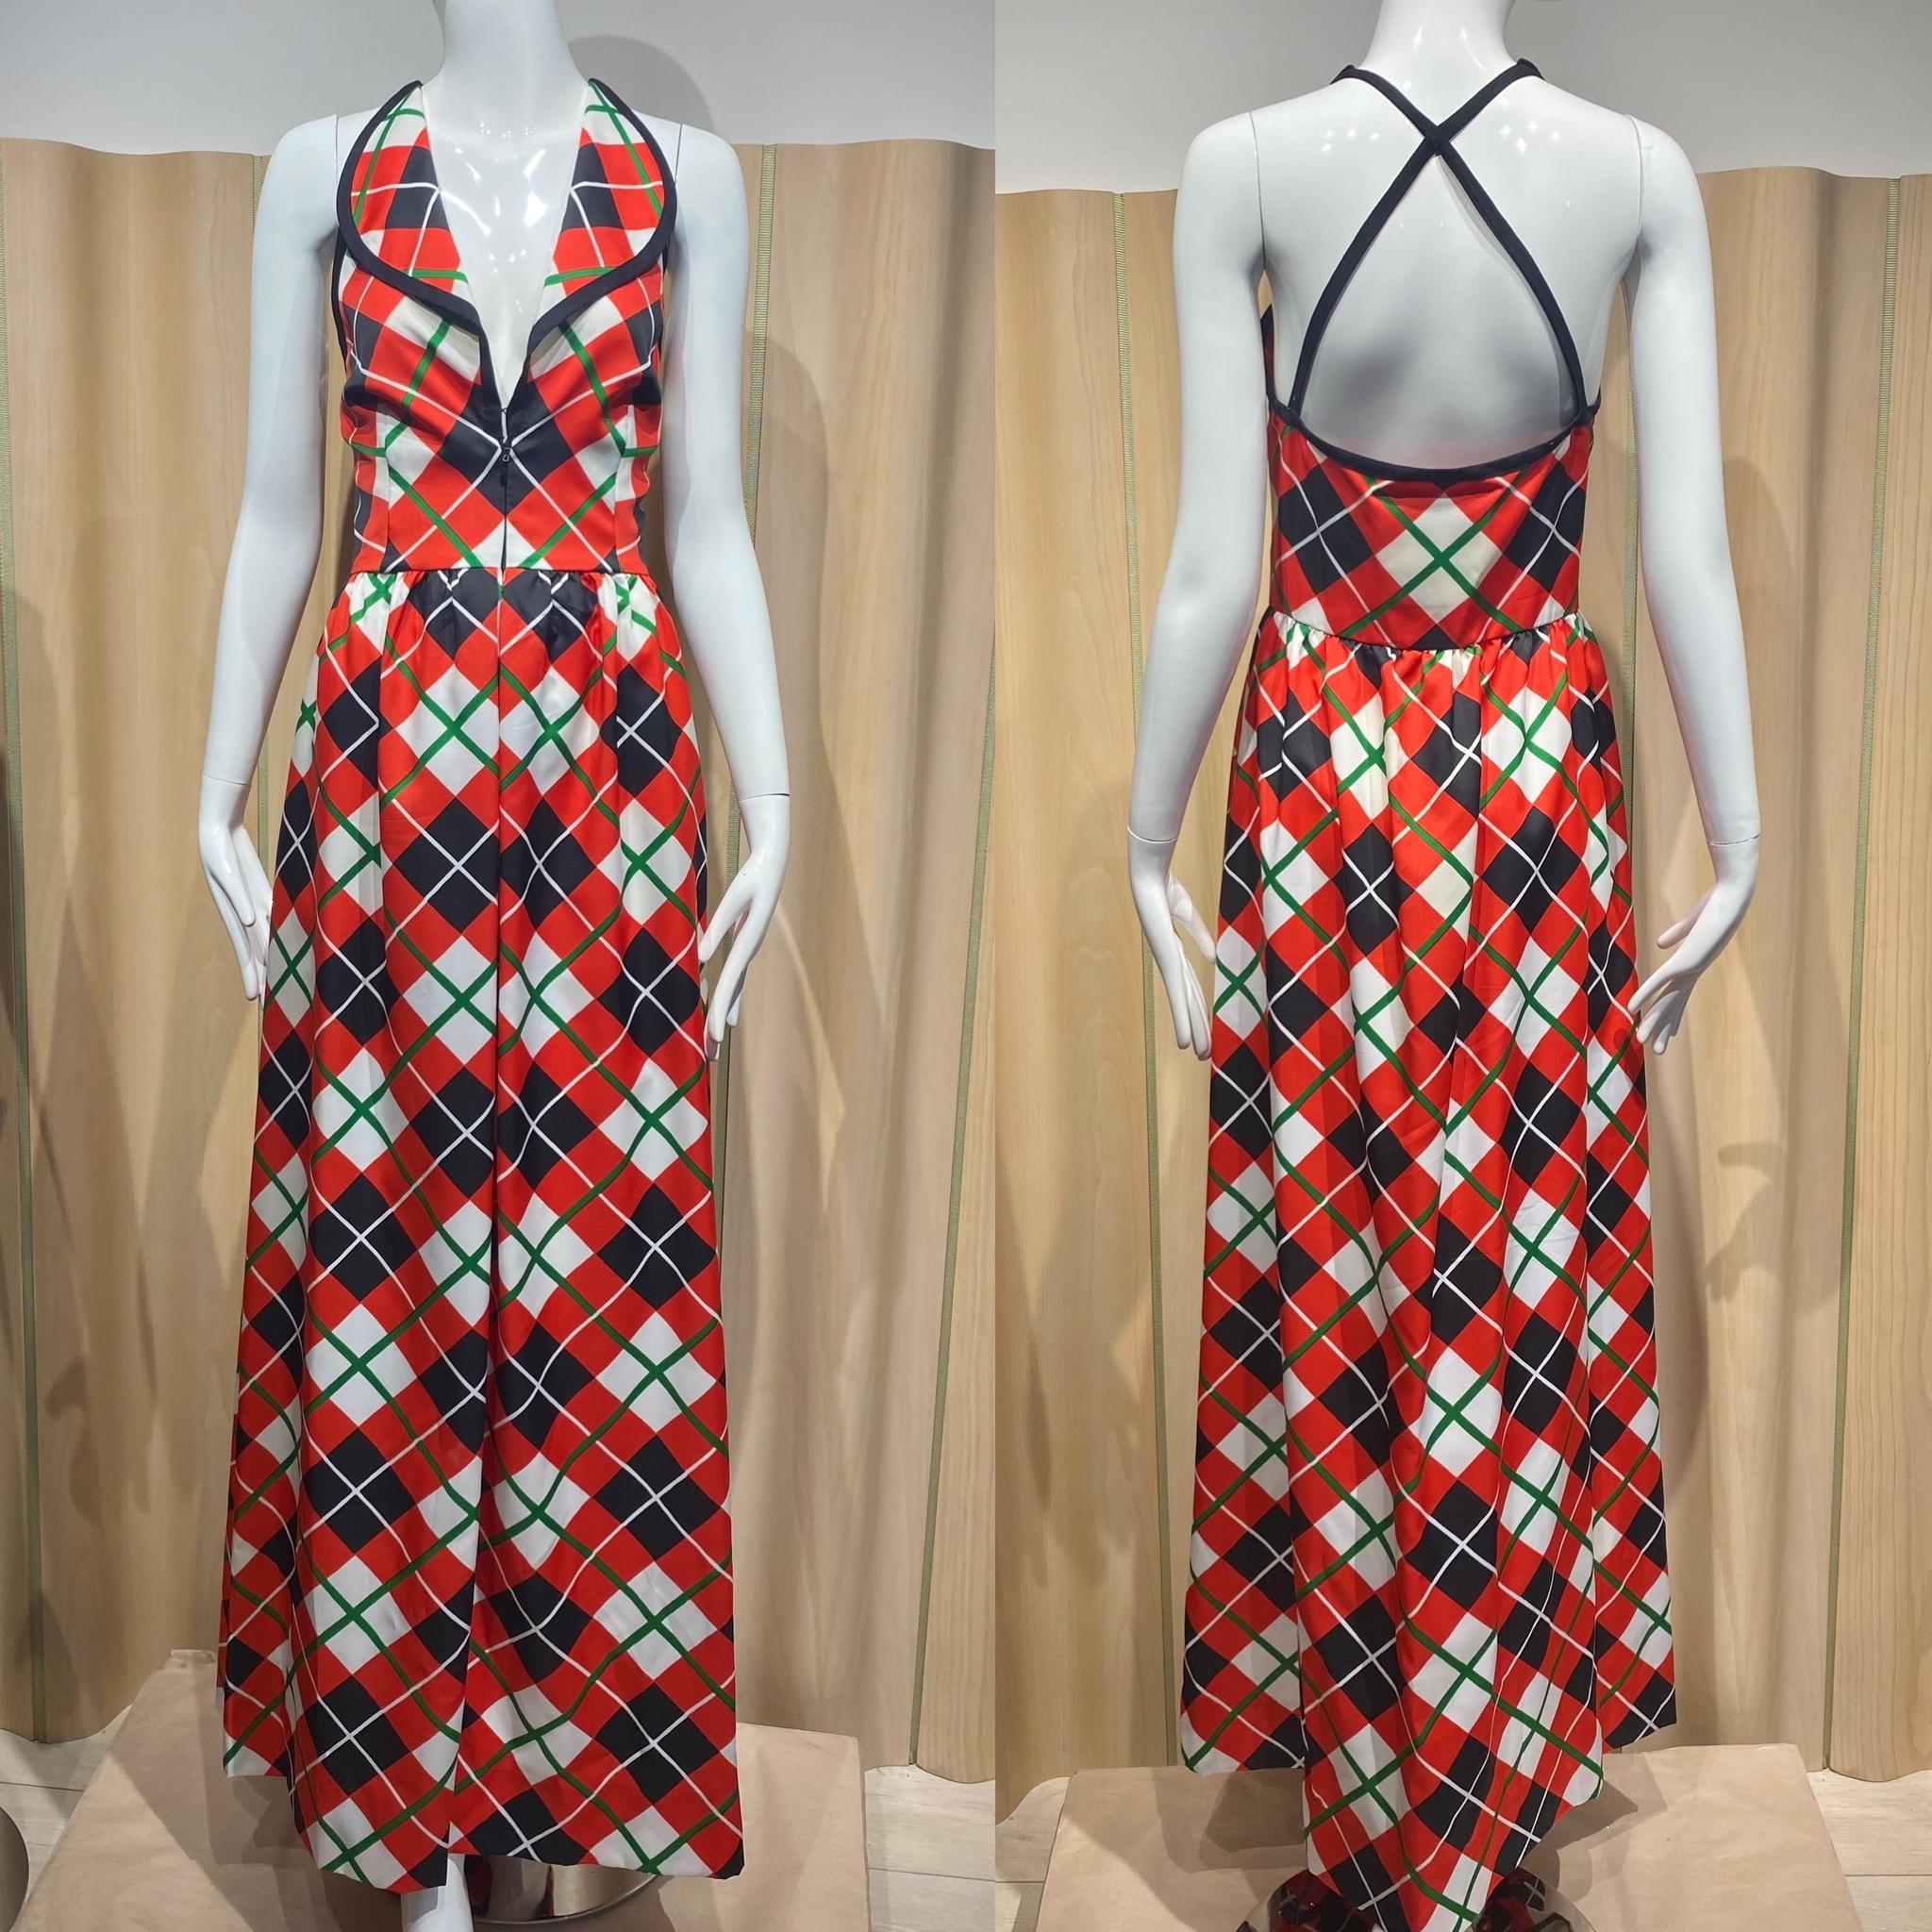 1970s Geoffrey Beene Plaid maxi halter dress in red, black and white. Racer back triangle back. Unique Collar.  
Size Medium
Measurement:
Bust : 38 inches / Waist 29 inches / Hips: 48 inches

* for reference out mannequin is size 4
32” Bust/ 26”